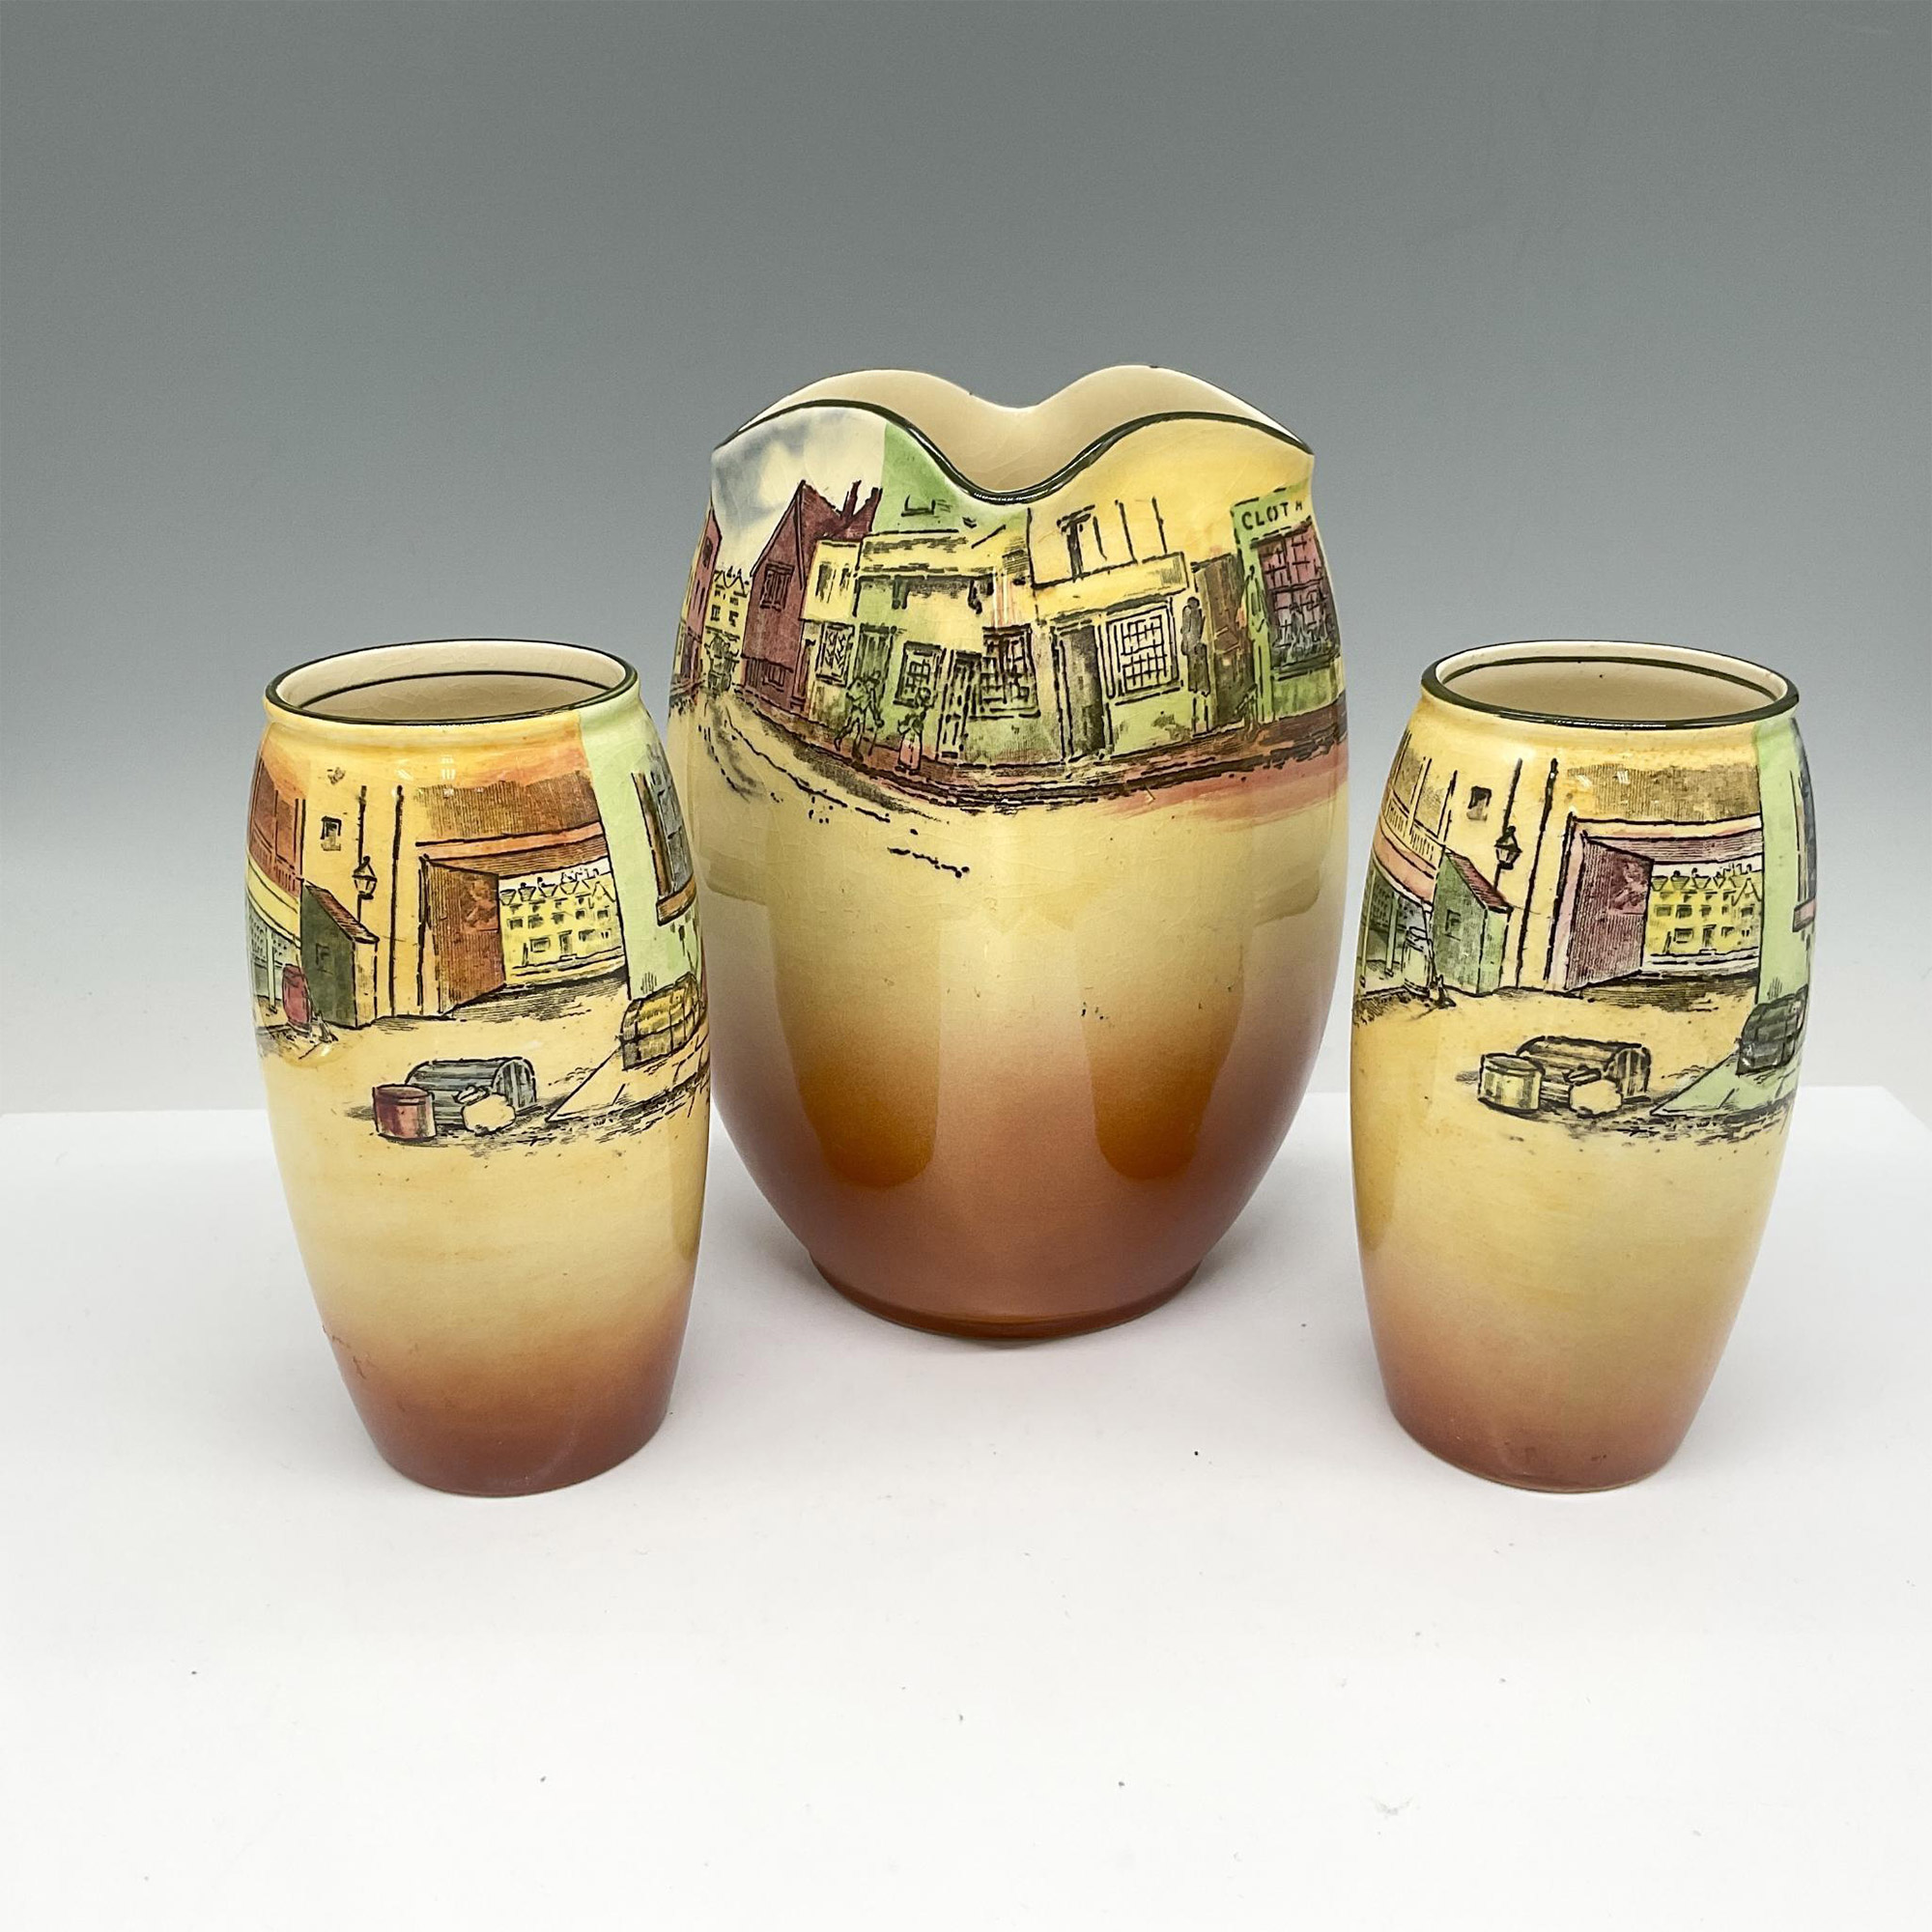 3pc Royal Doulton Dickens Ware Vases - Image 2 of 3